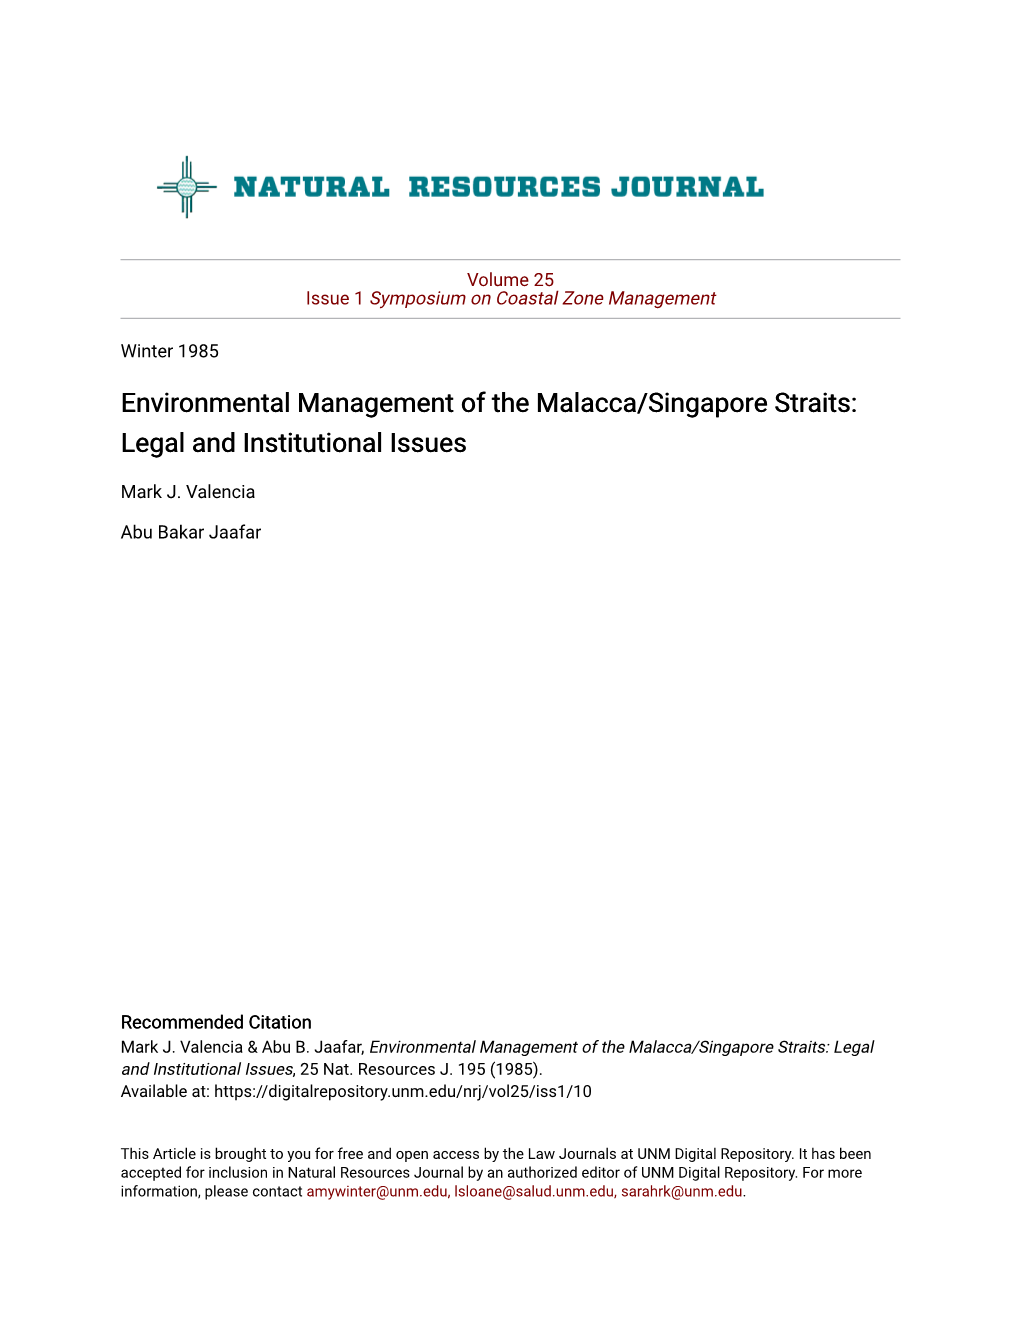 Environmental Management of the Malacca/Singapore Straits: Legal and Institutional Issues